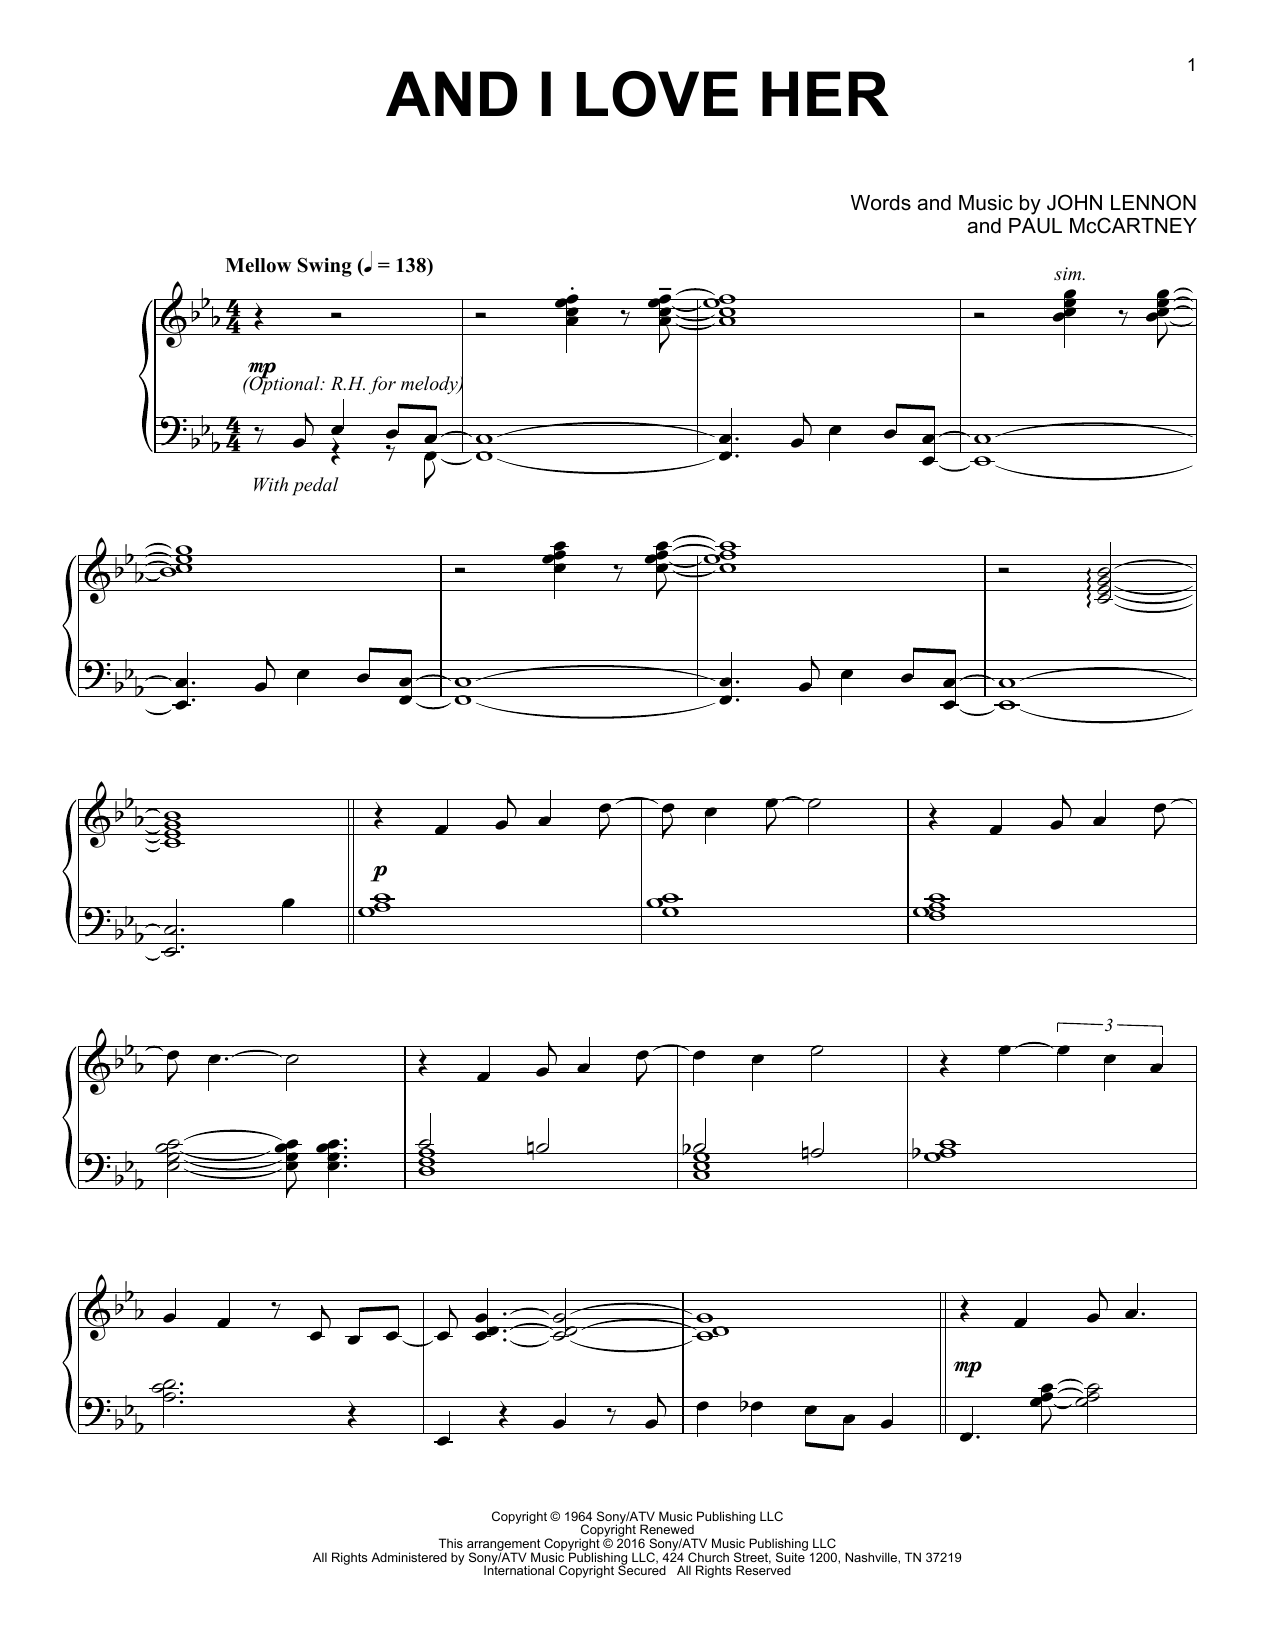 Download The Beatles And I Love Her [Jazz version] Sheet Music